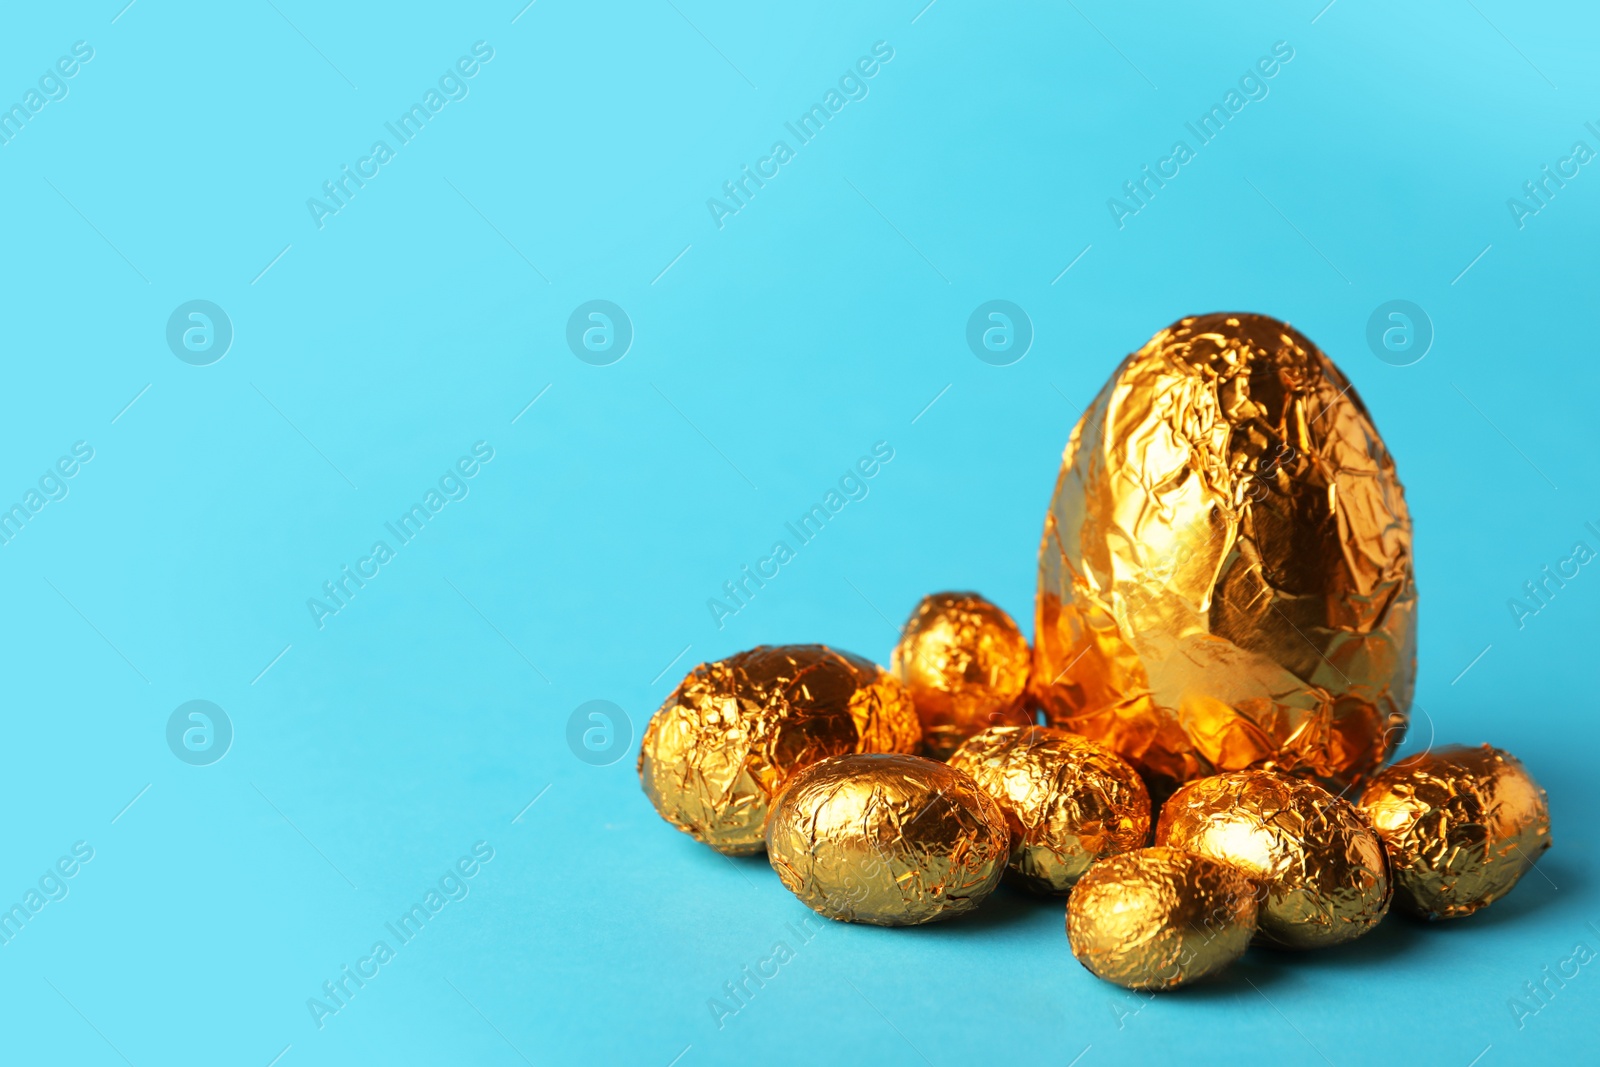 Photo of Chocolate eggs wrapped in golden foil on light blue background. Space for text